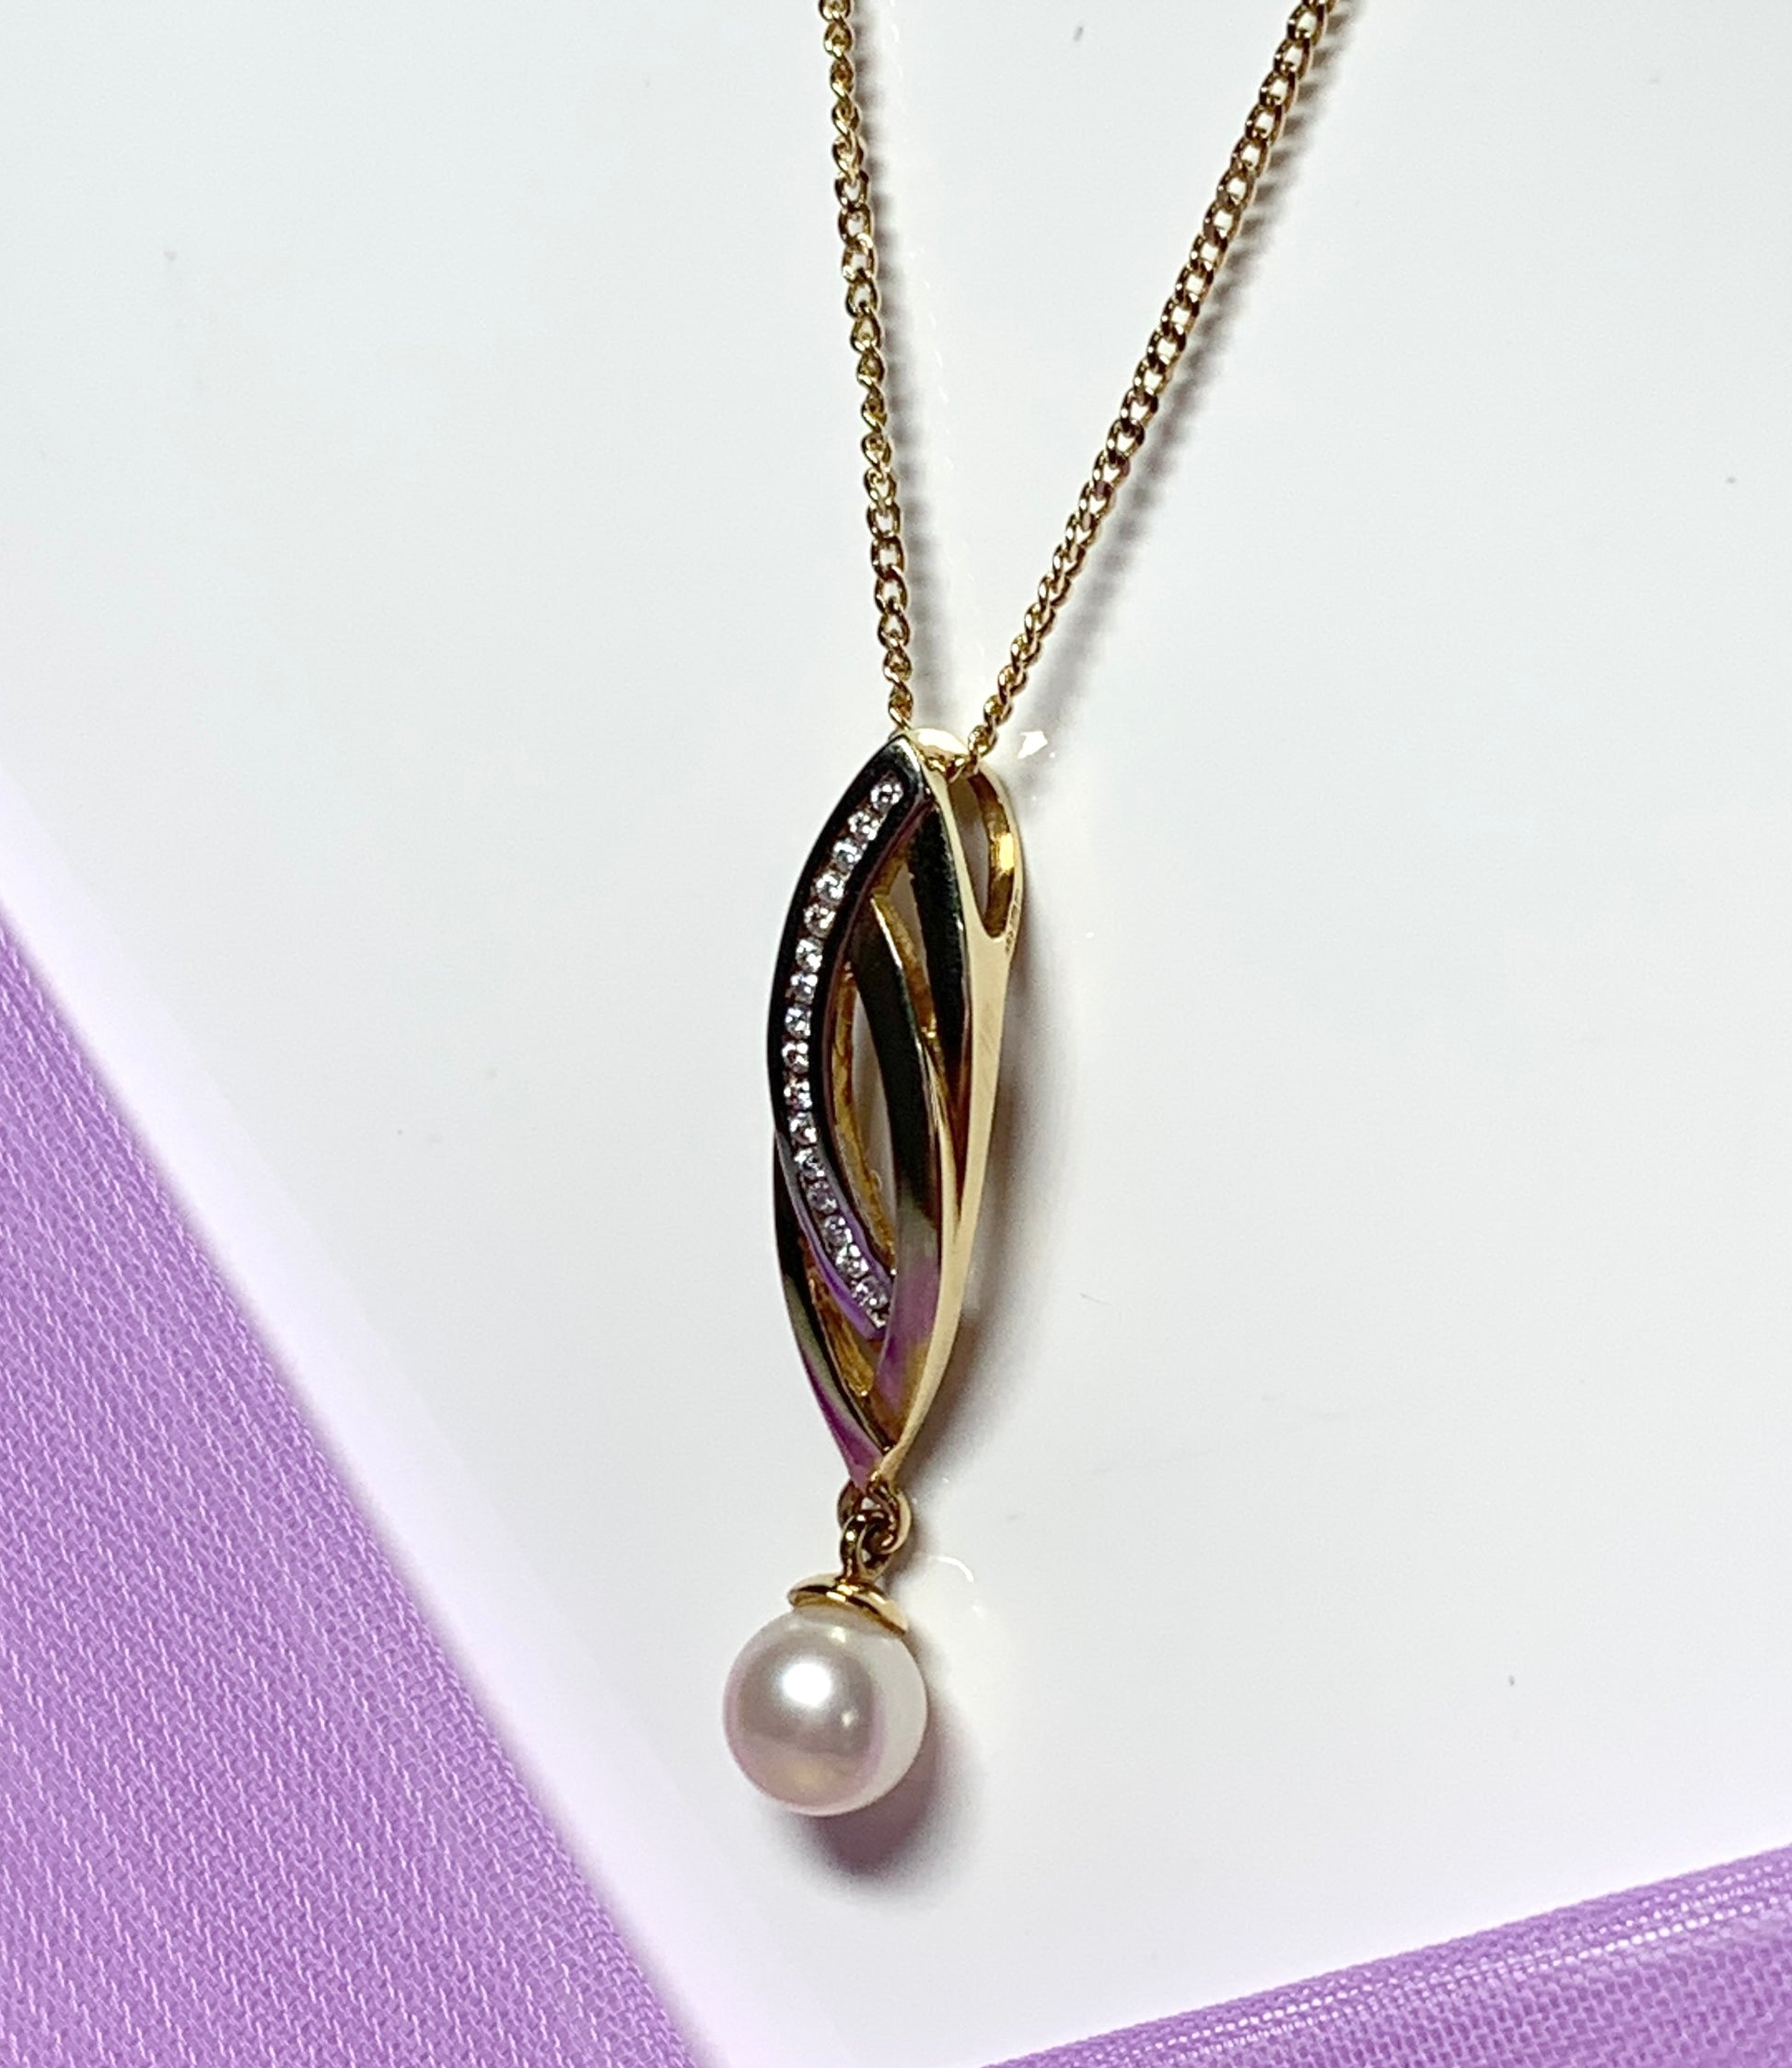 Pearl and cubic zirconia necklace freshwater cultured two tone gold pendant